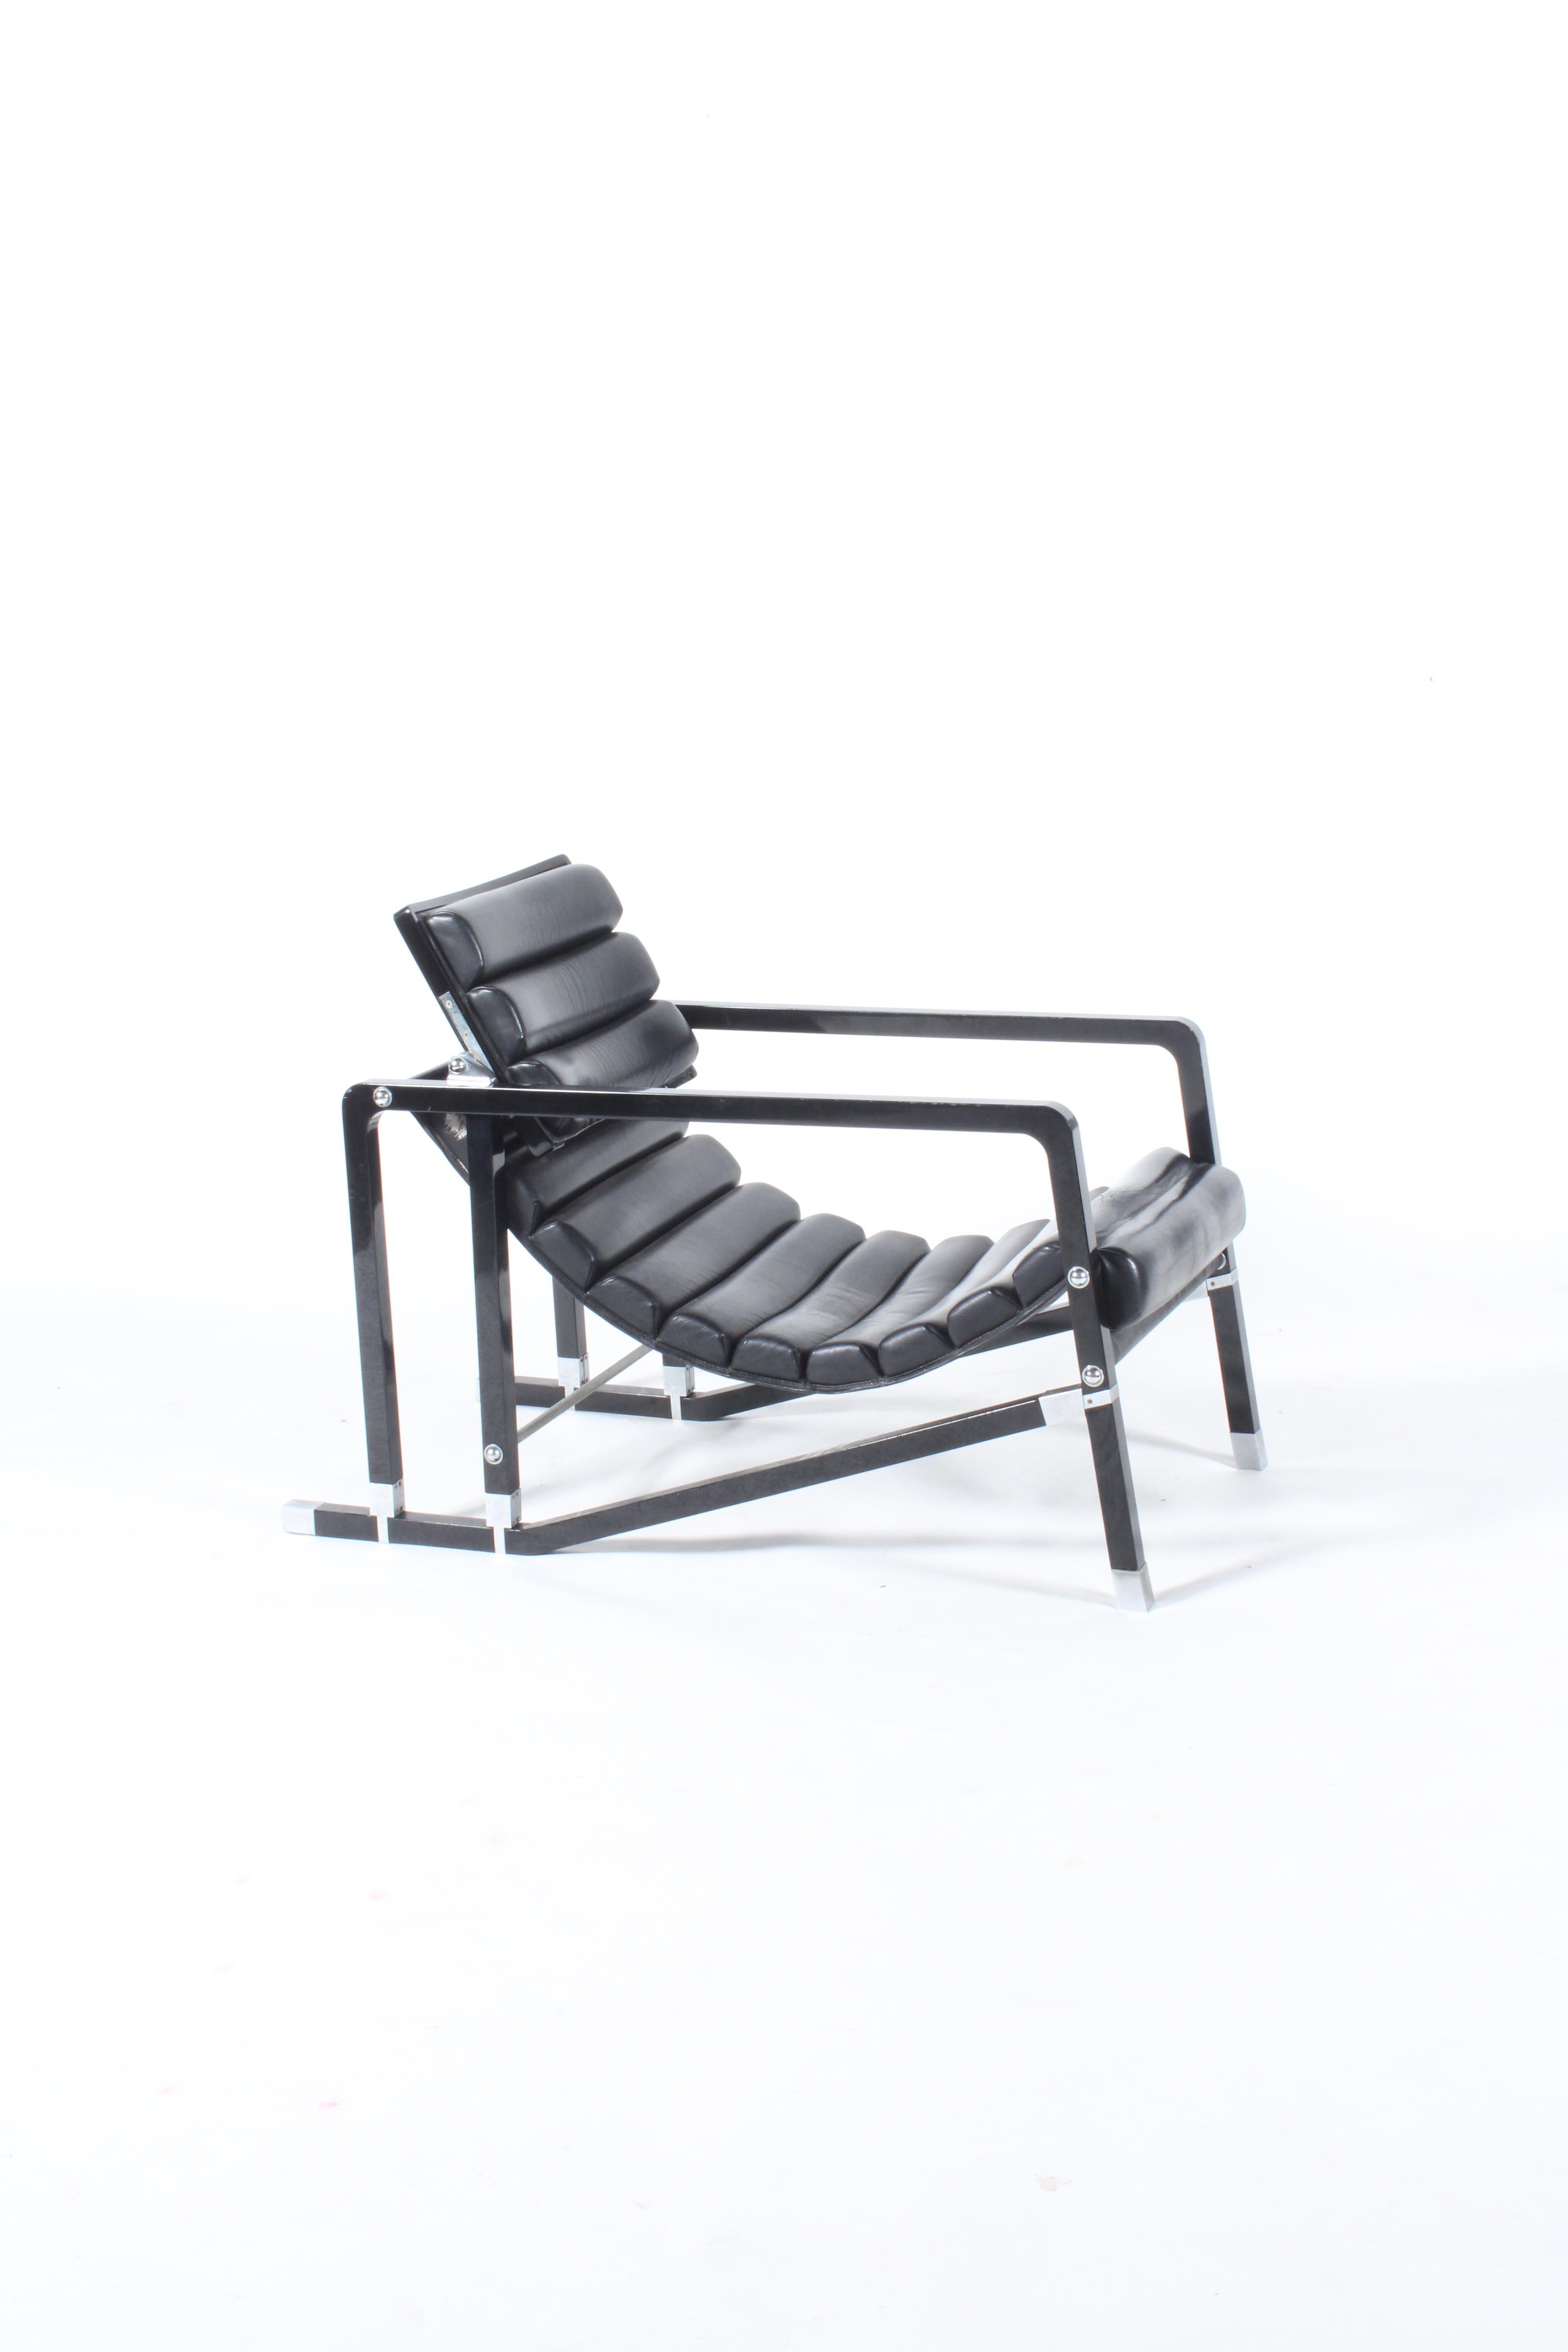 Late 20th Century Vintage Early Edition Transat Chair By Eileen Gray for Ecart International  For Sale